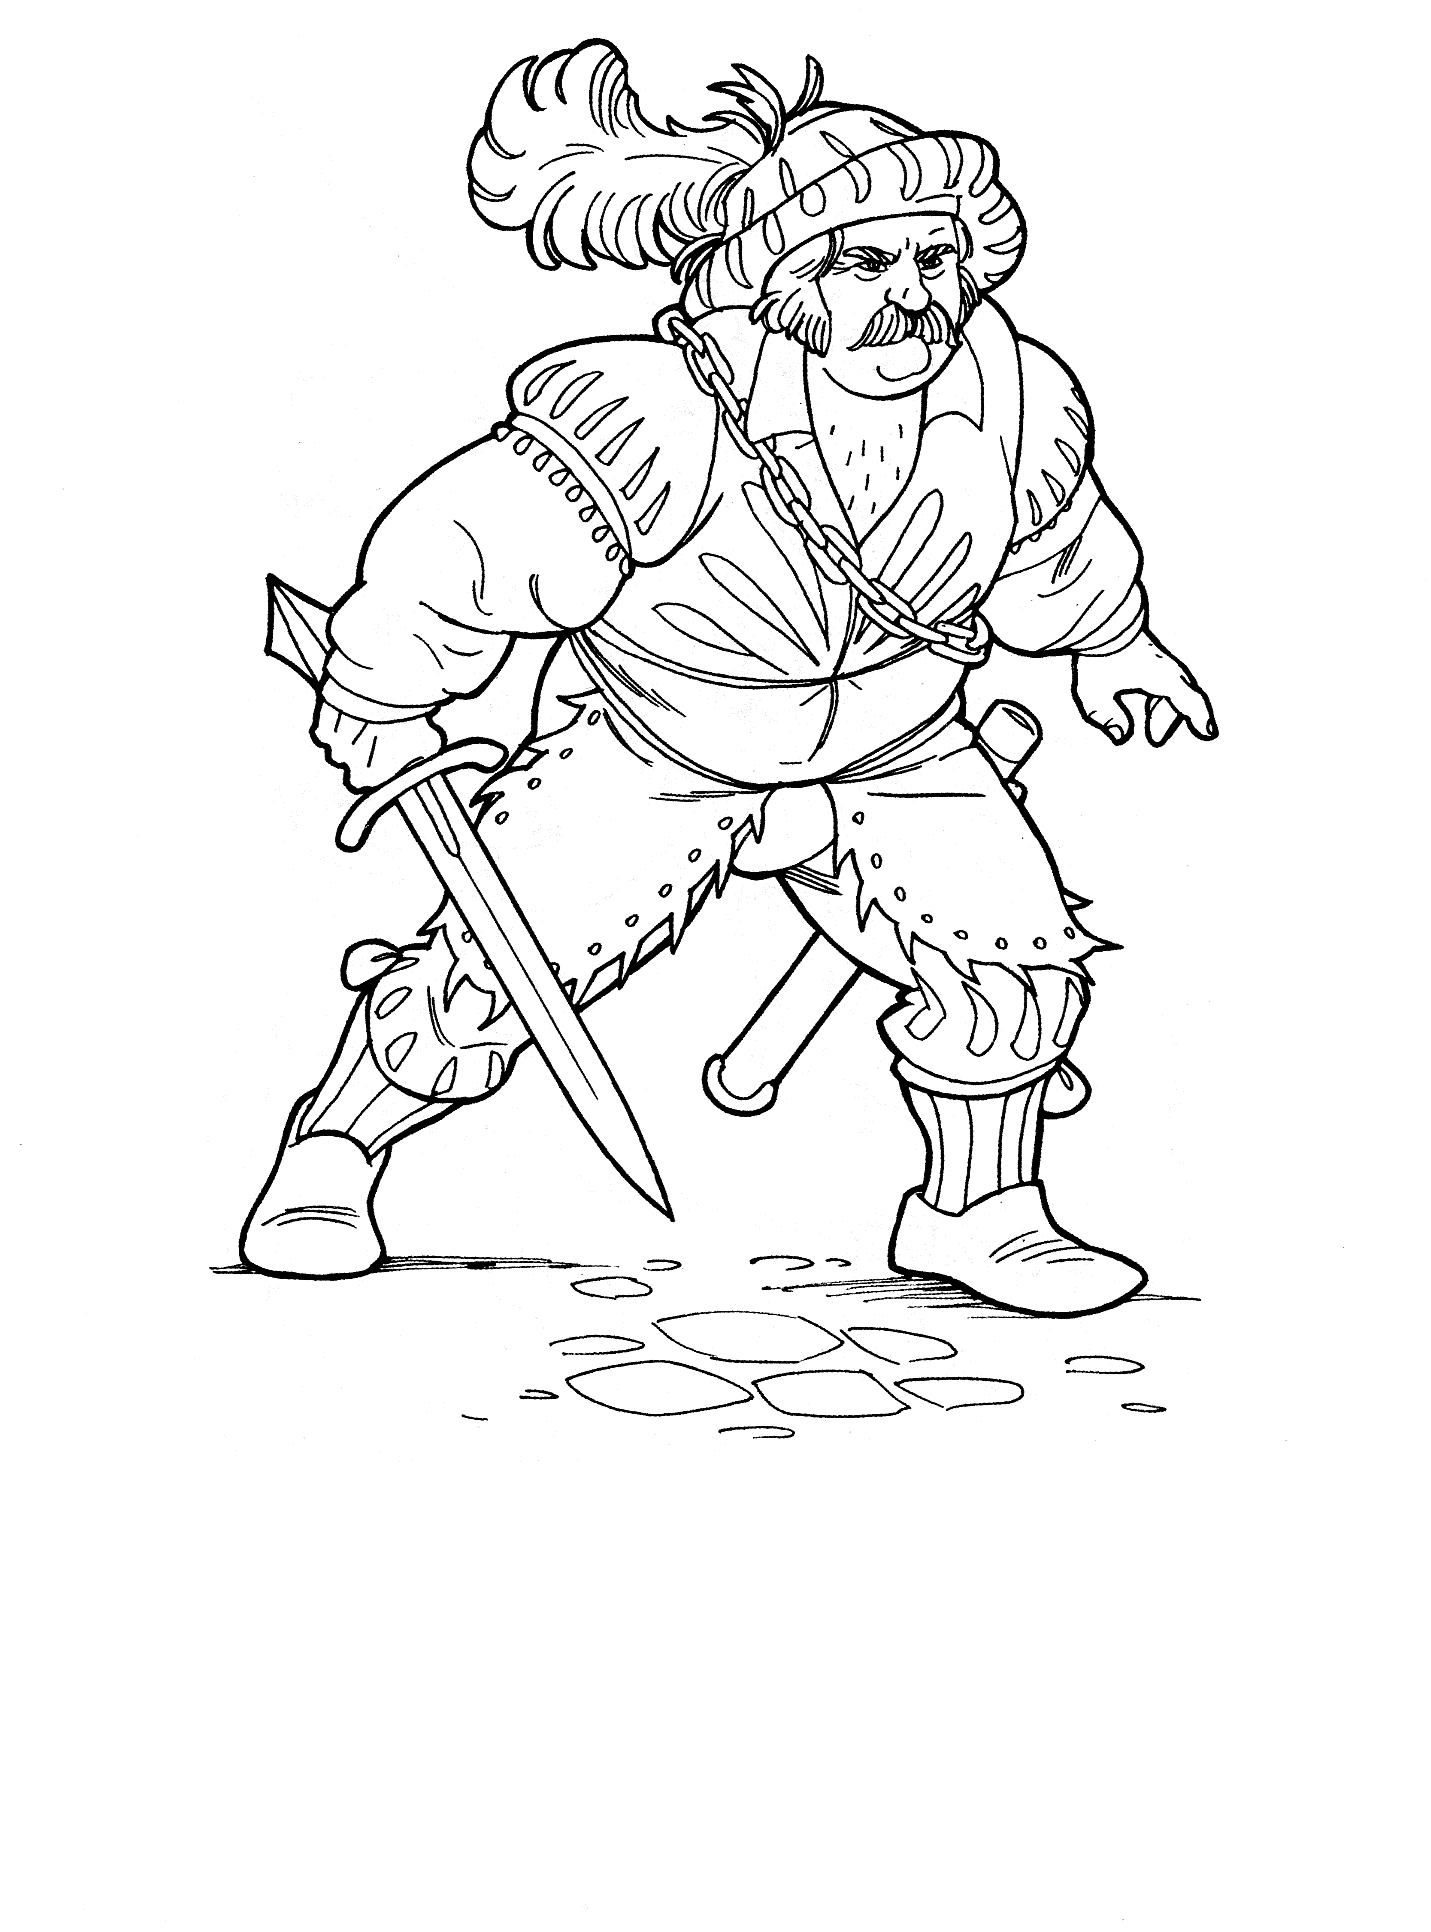 Download Coloring page - Mercenary Guard